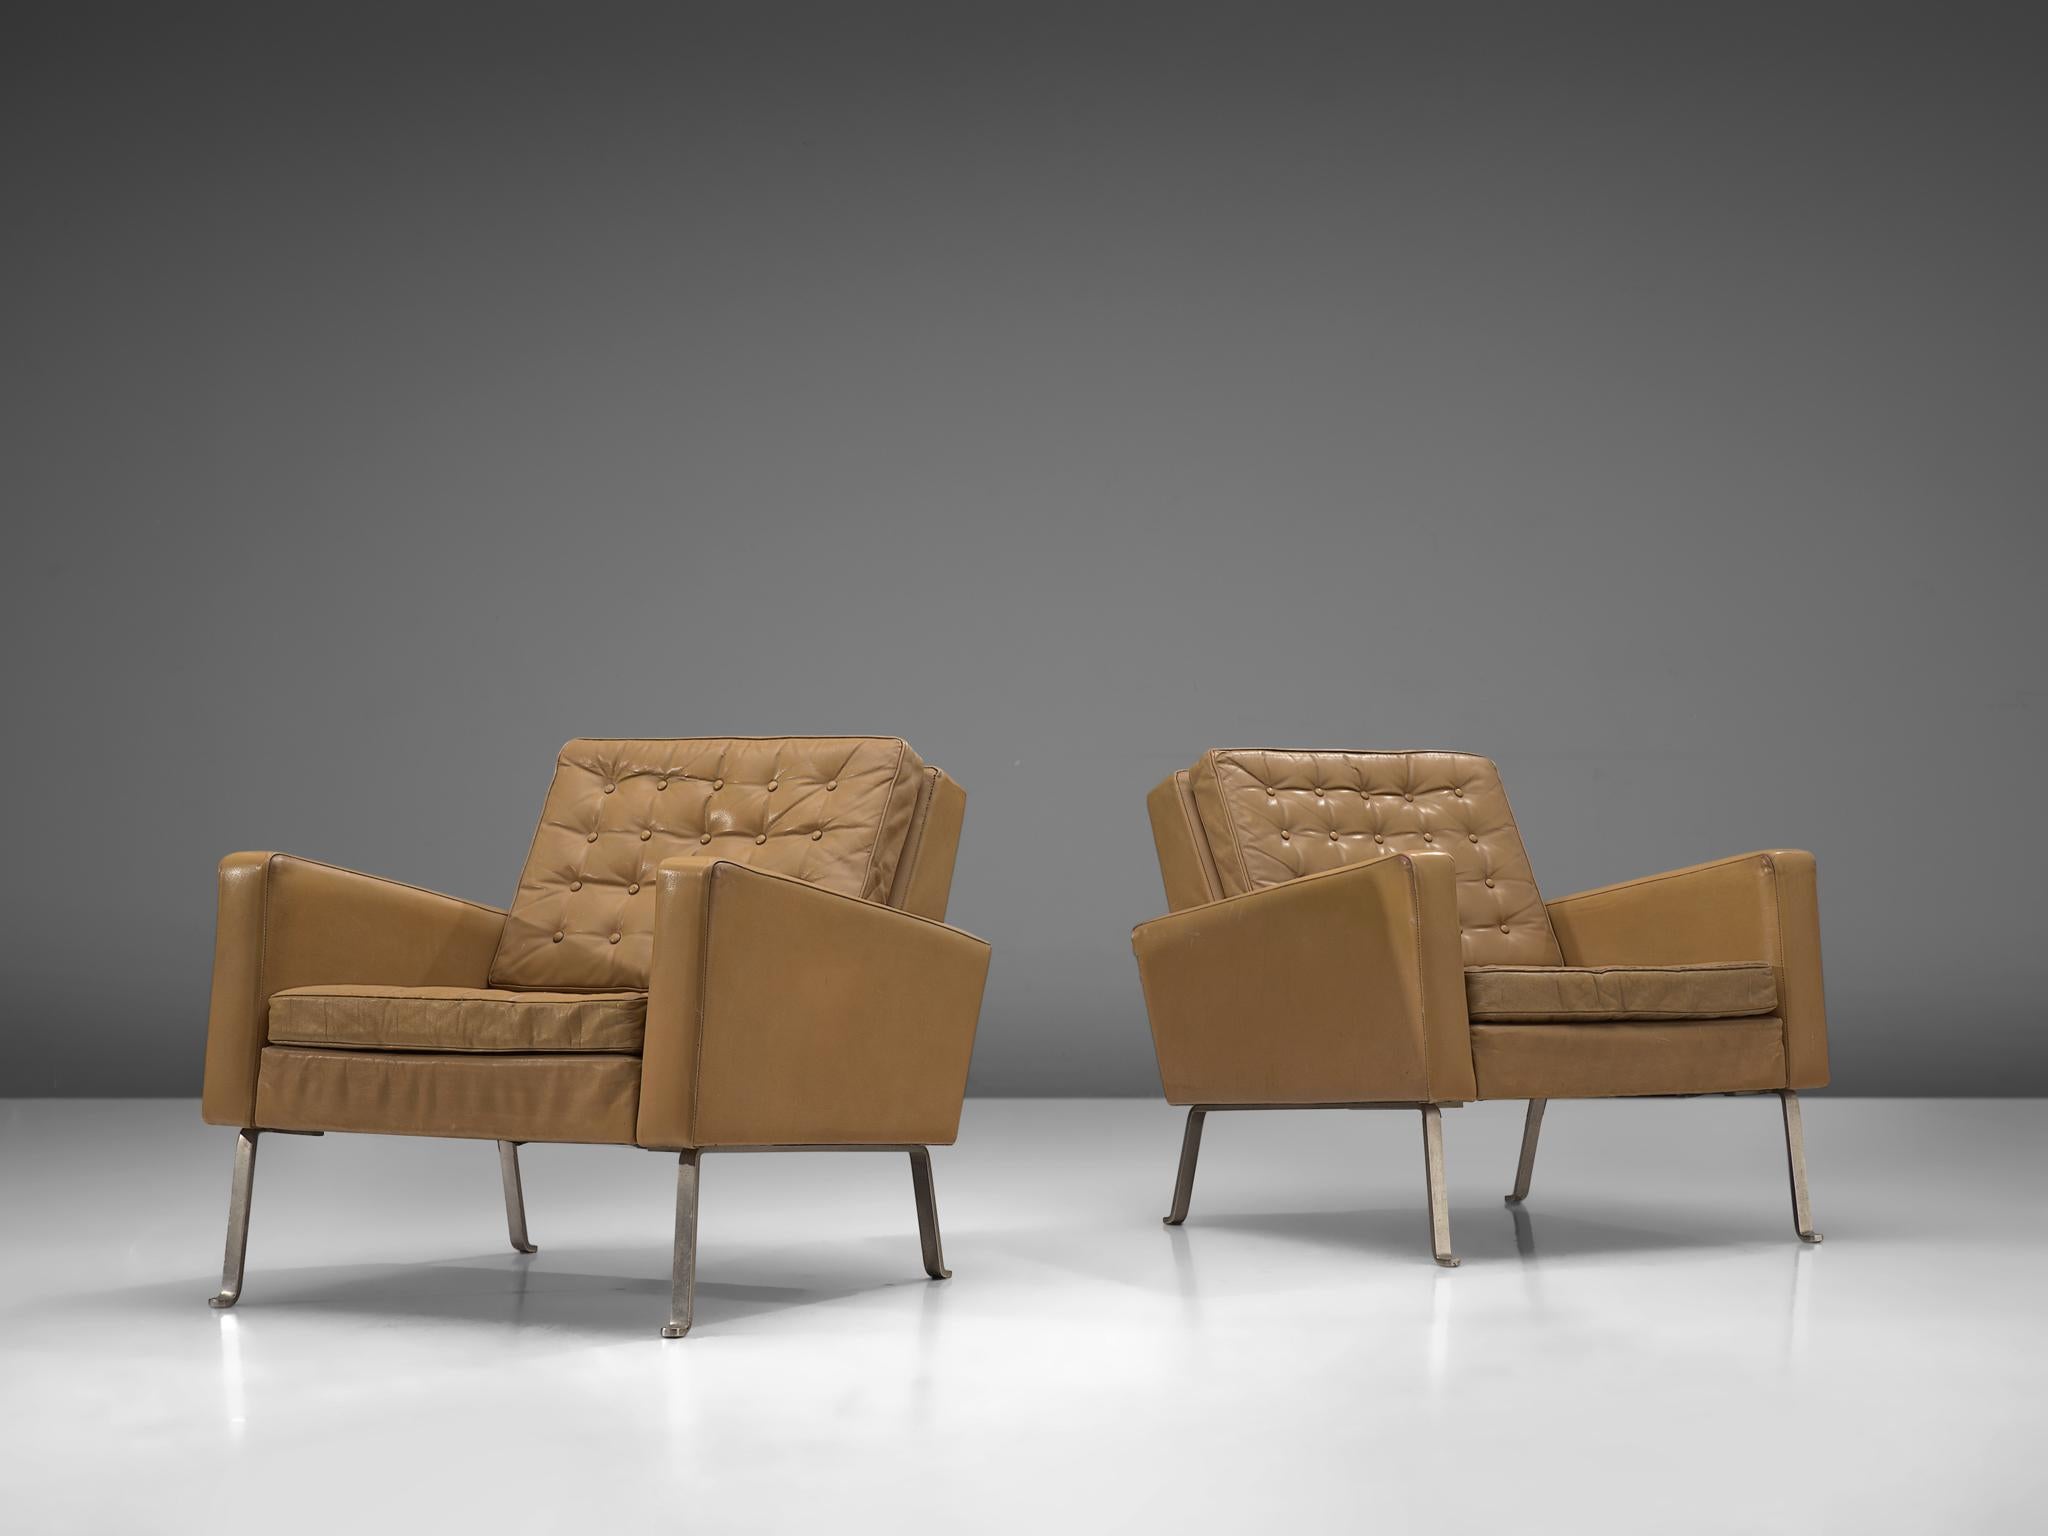 Roland Ranier, pair of lounge chairs, leather and metal, Austria, 1950s

Modern and beautiful armchairs. These chairs form an extraordinary stately set, being both crisp and warm at the same time. The metal frame holds a green leather body with